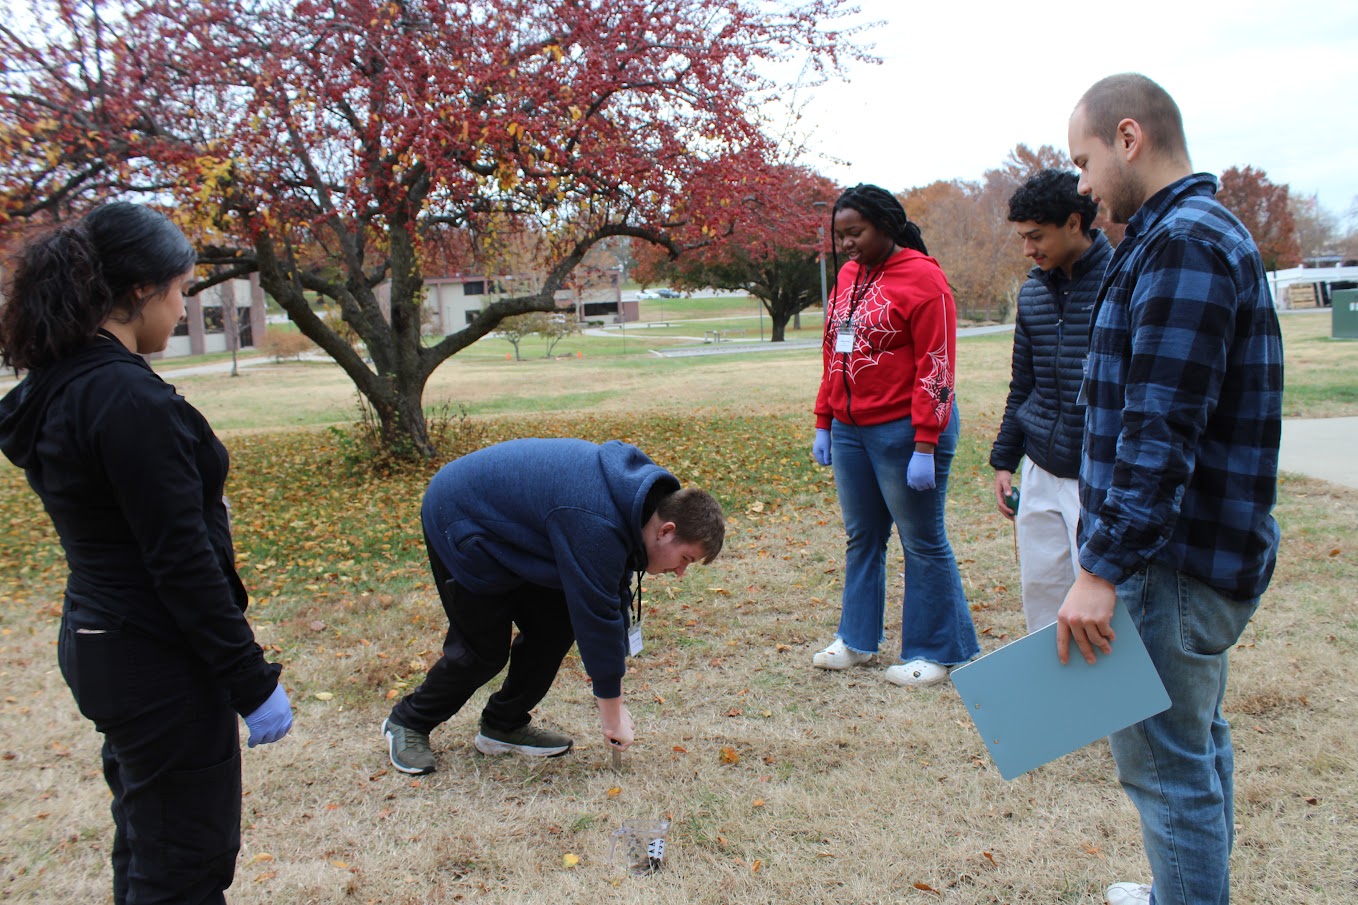 5 students standing in the grass, one leans down to take a soil sample